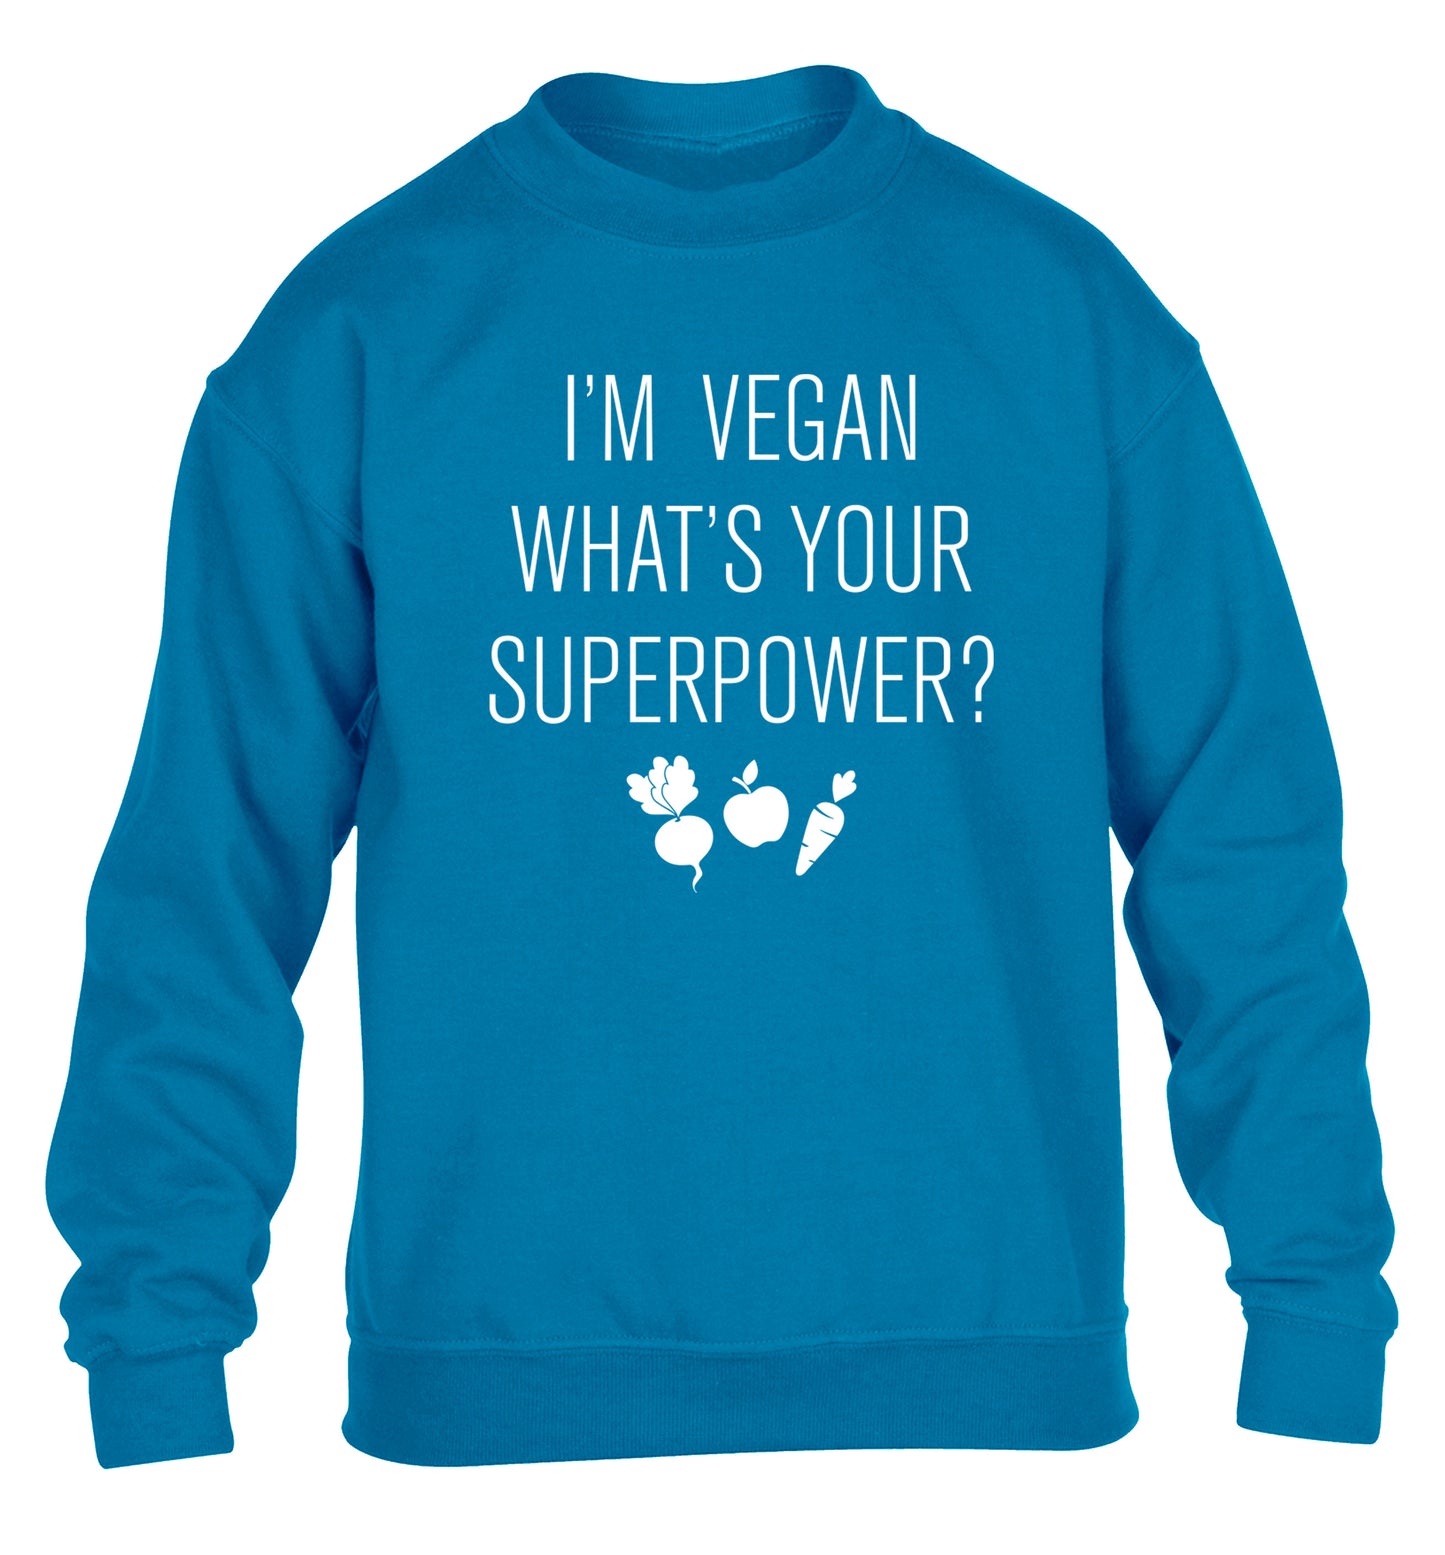 I'm Vegan What's Your Superpower? children's blue sweater 12-13 Years